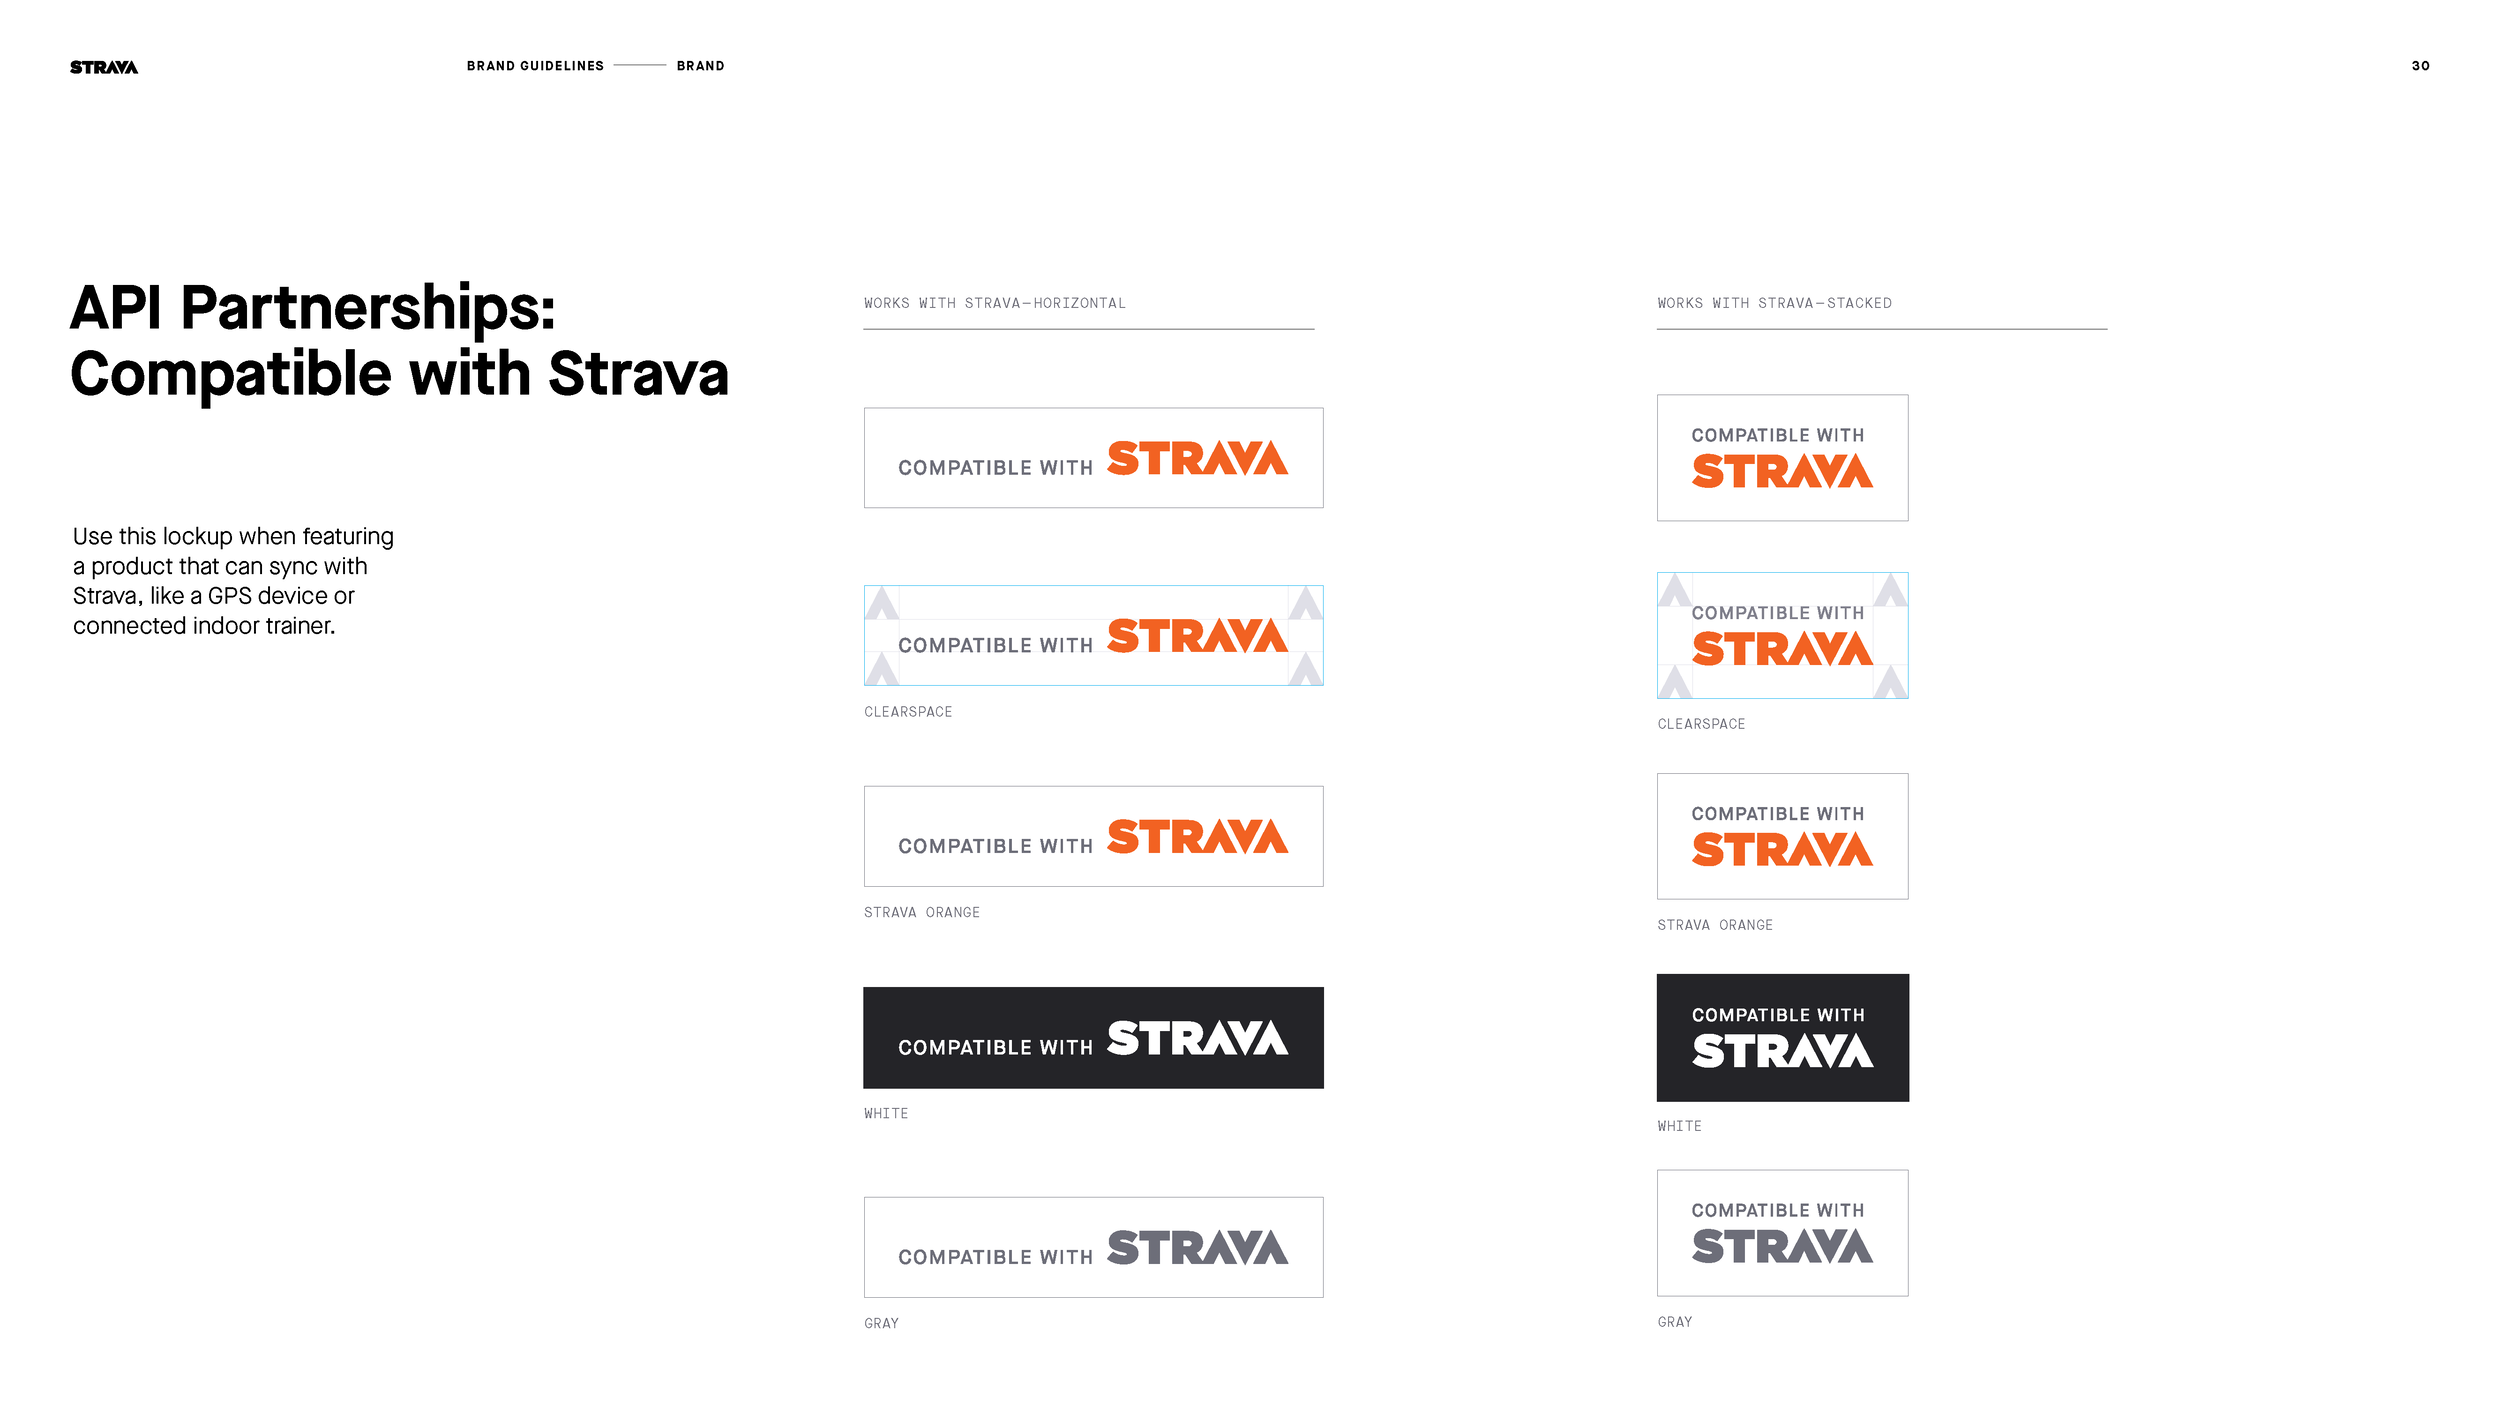 Strava_Page_030.png